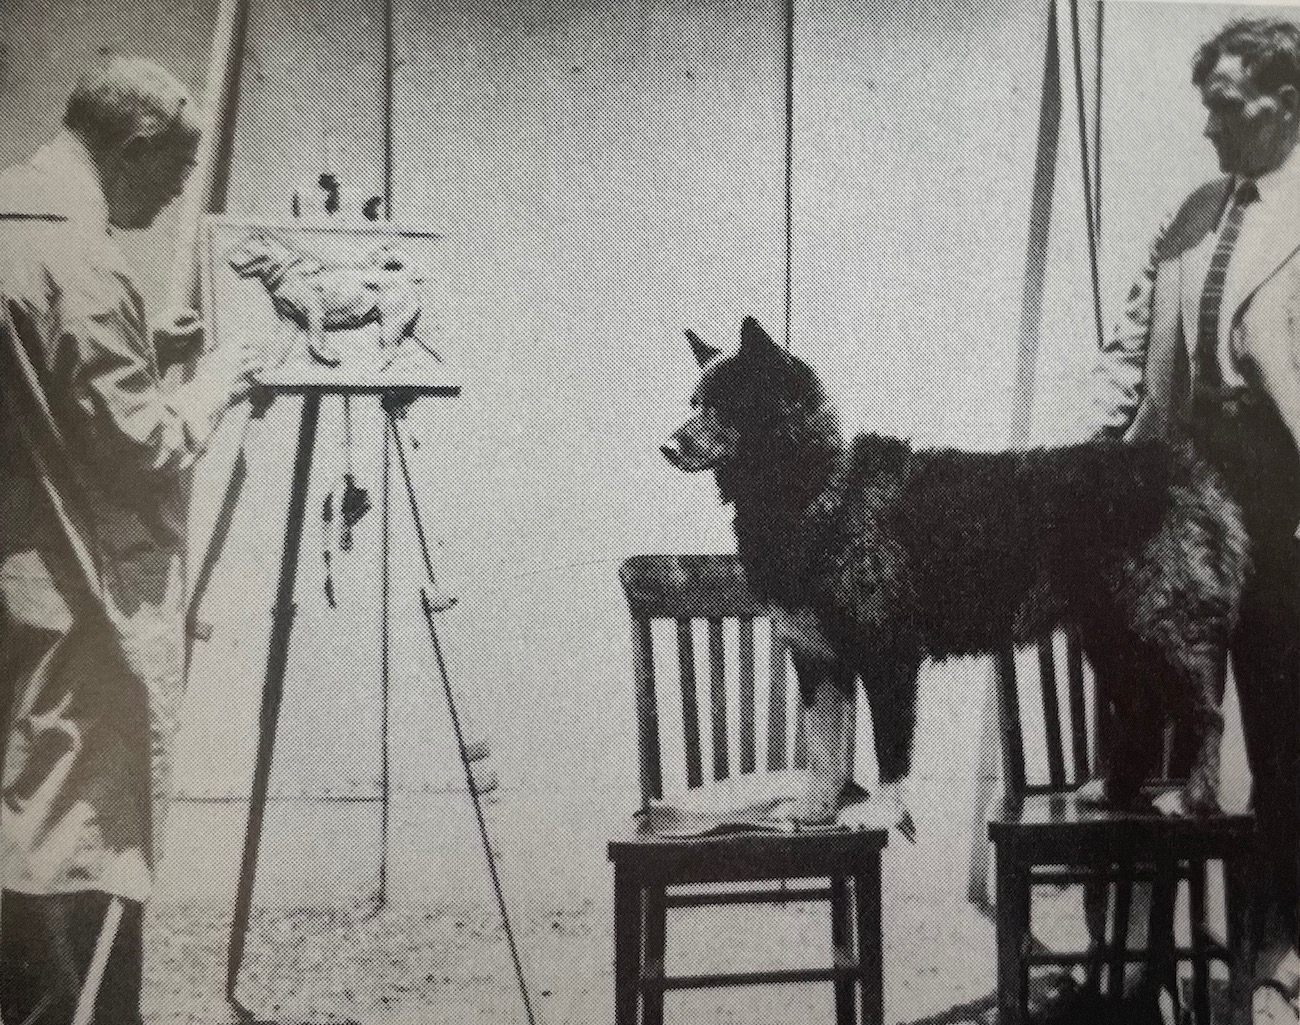 In this black and white photo, a husky-breed dog stands at attention on two chairs. A man in a long coat adjusts a panel on an easel in front of the dog. The panel features a sculpted relief image of a similar dog. Another man stands behind the dog on the chairs.